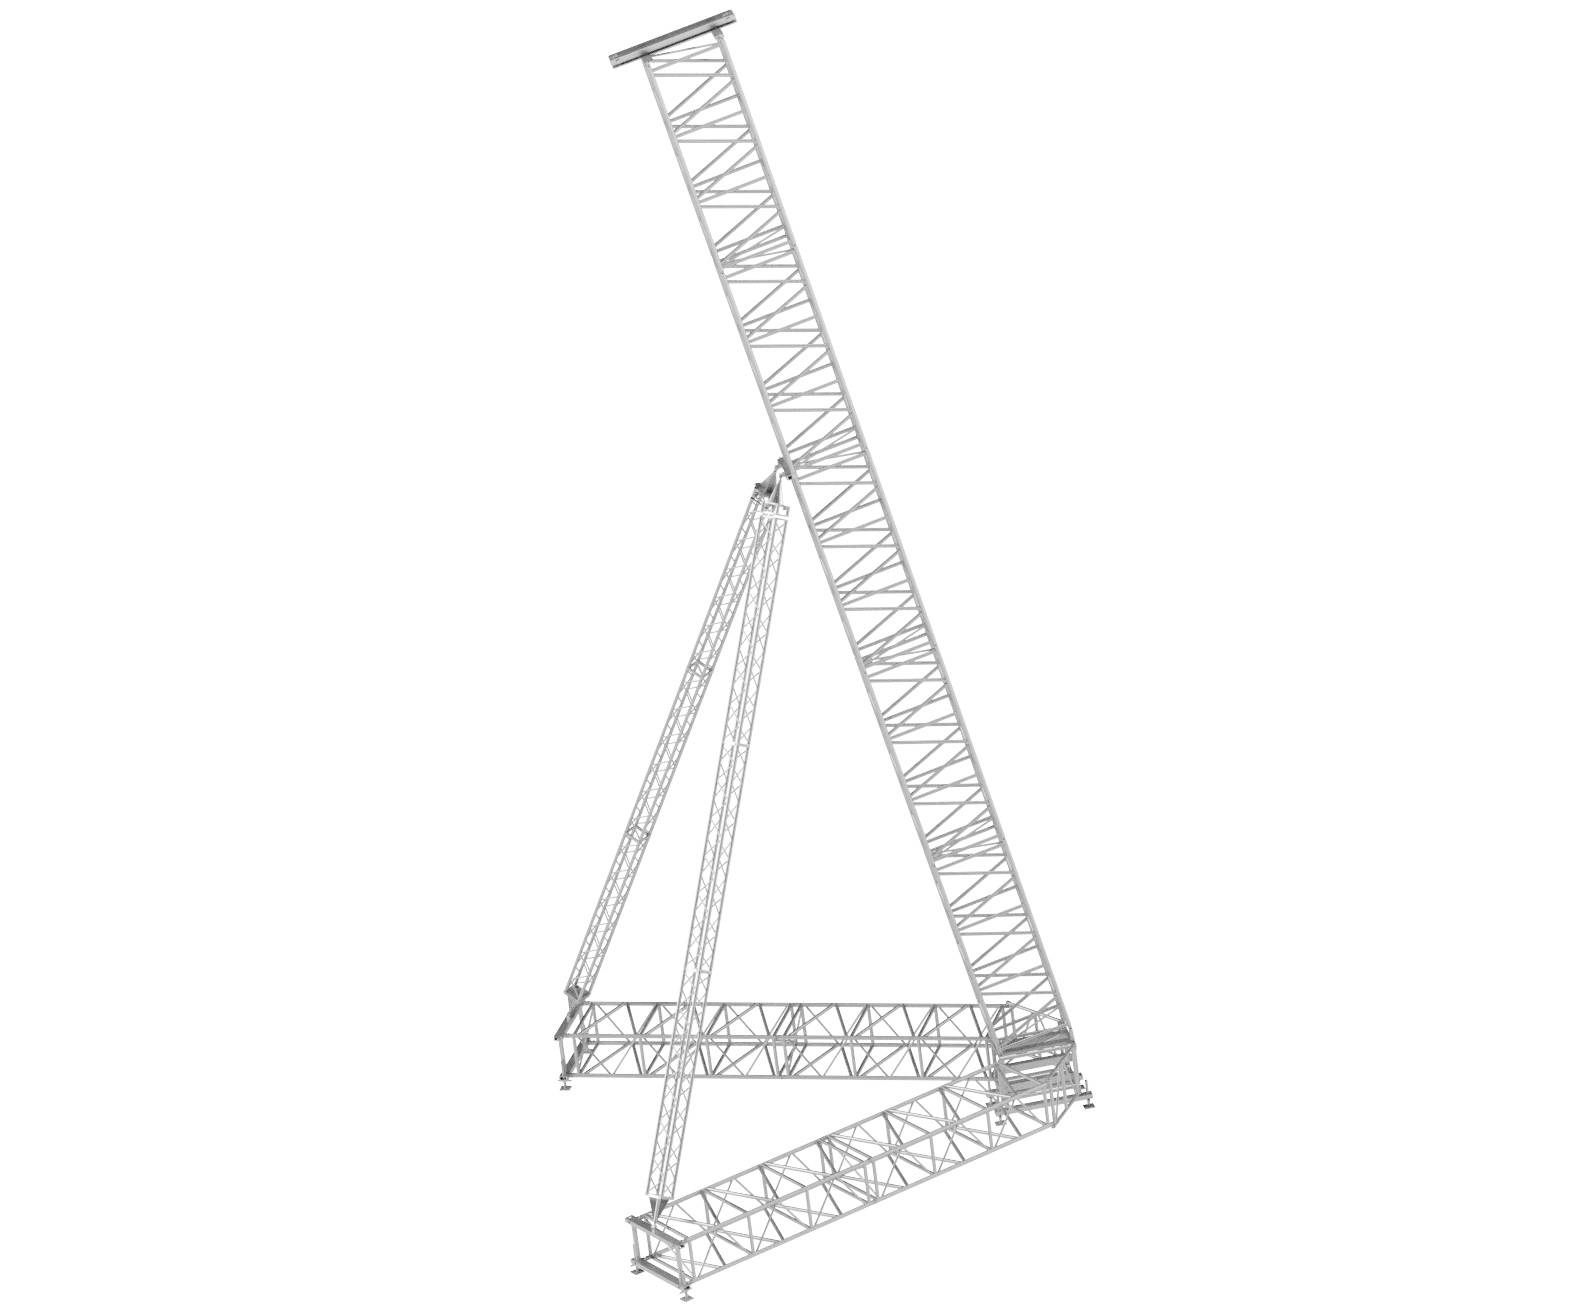 FLYINTOWER 16-2.000 - Support tower for 2,000kg up to 16m